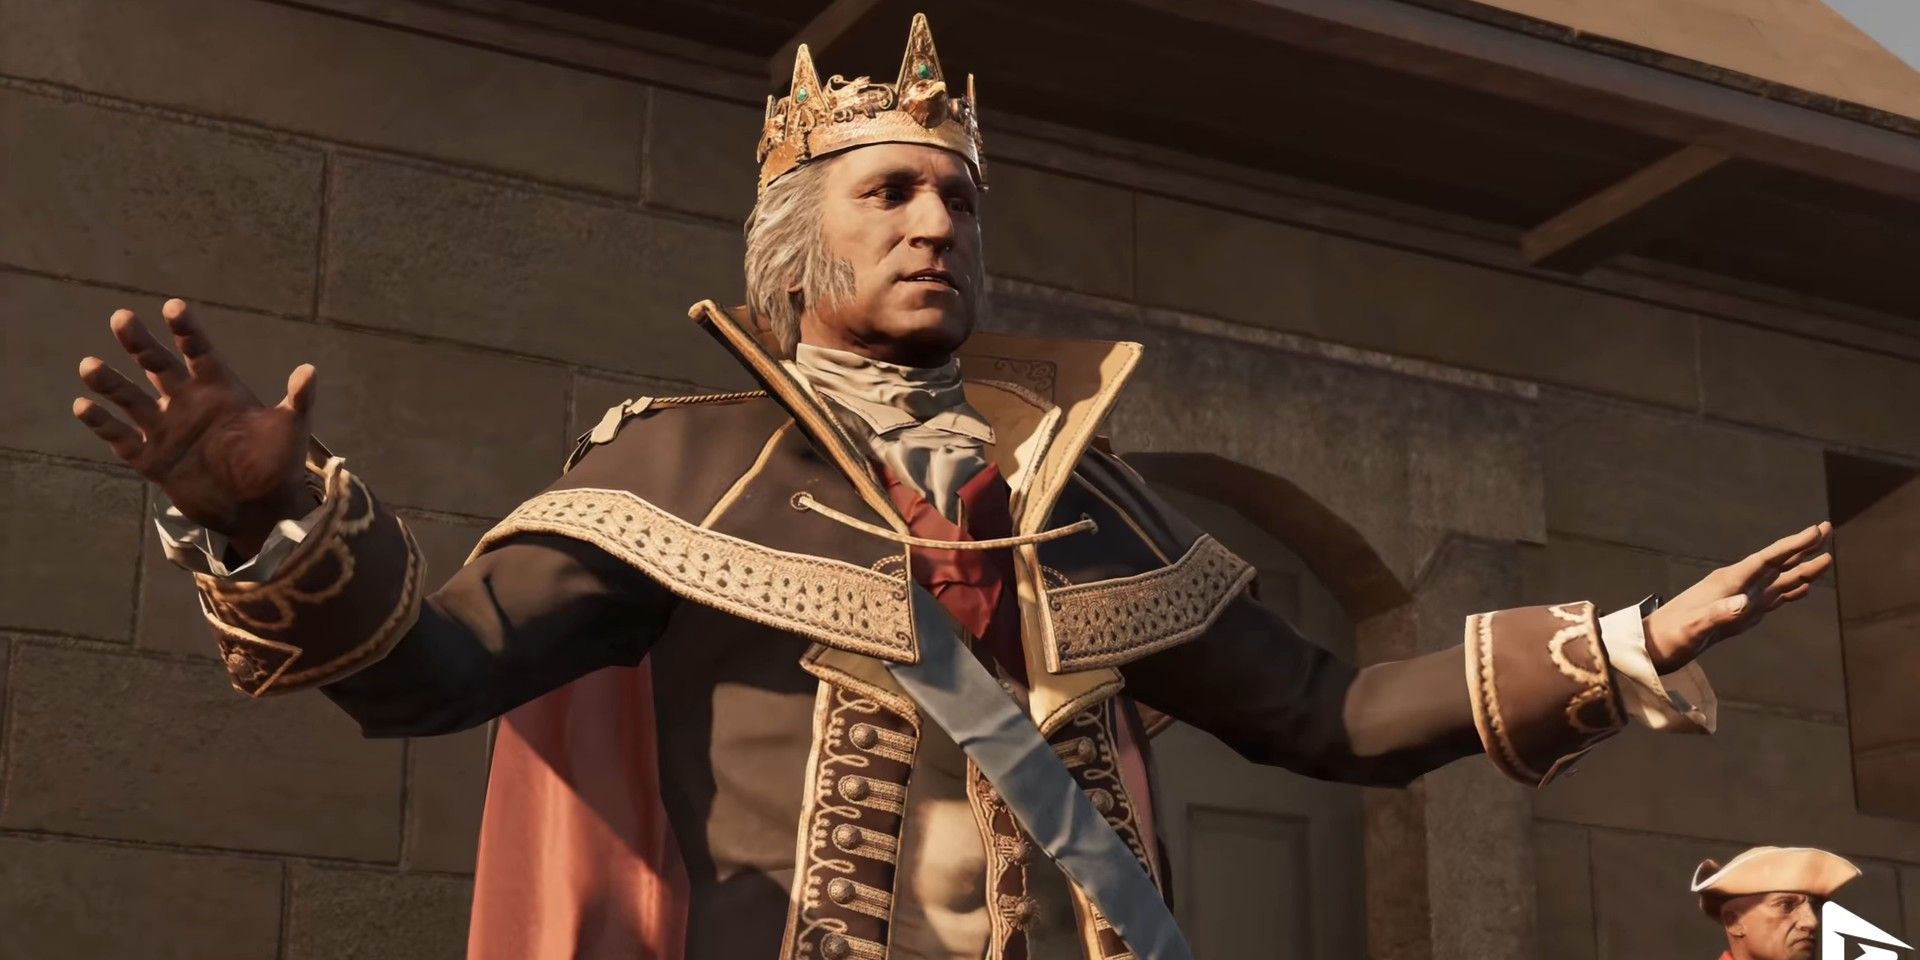 George Washington is made a tyrant in yet another Assassin's Creed alternate timeline.